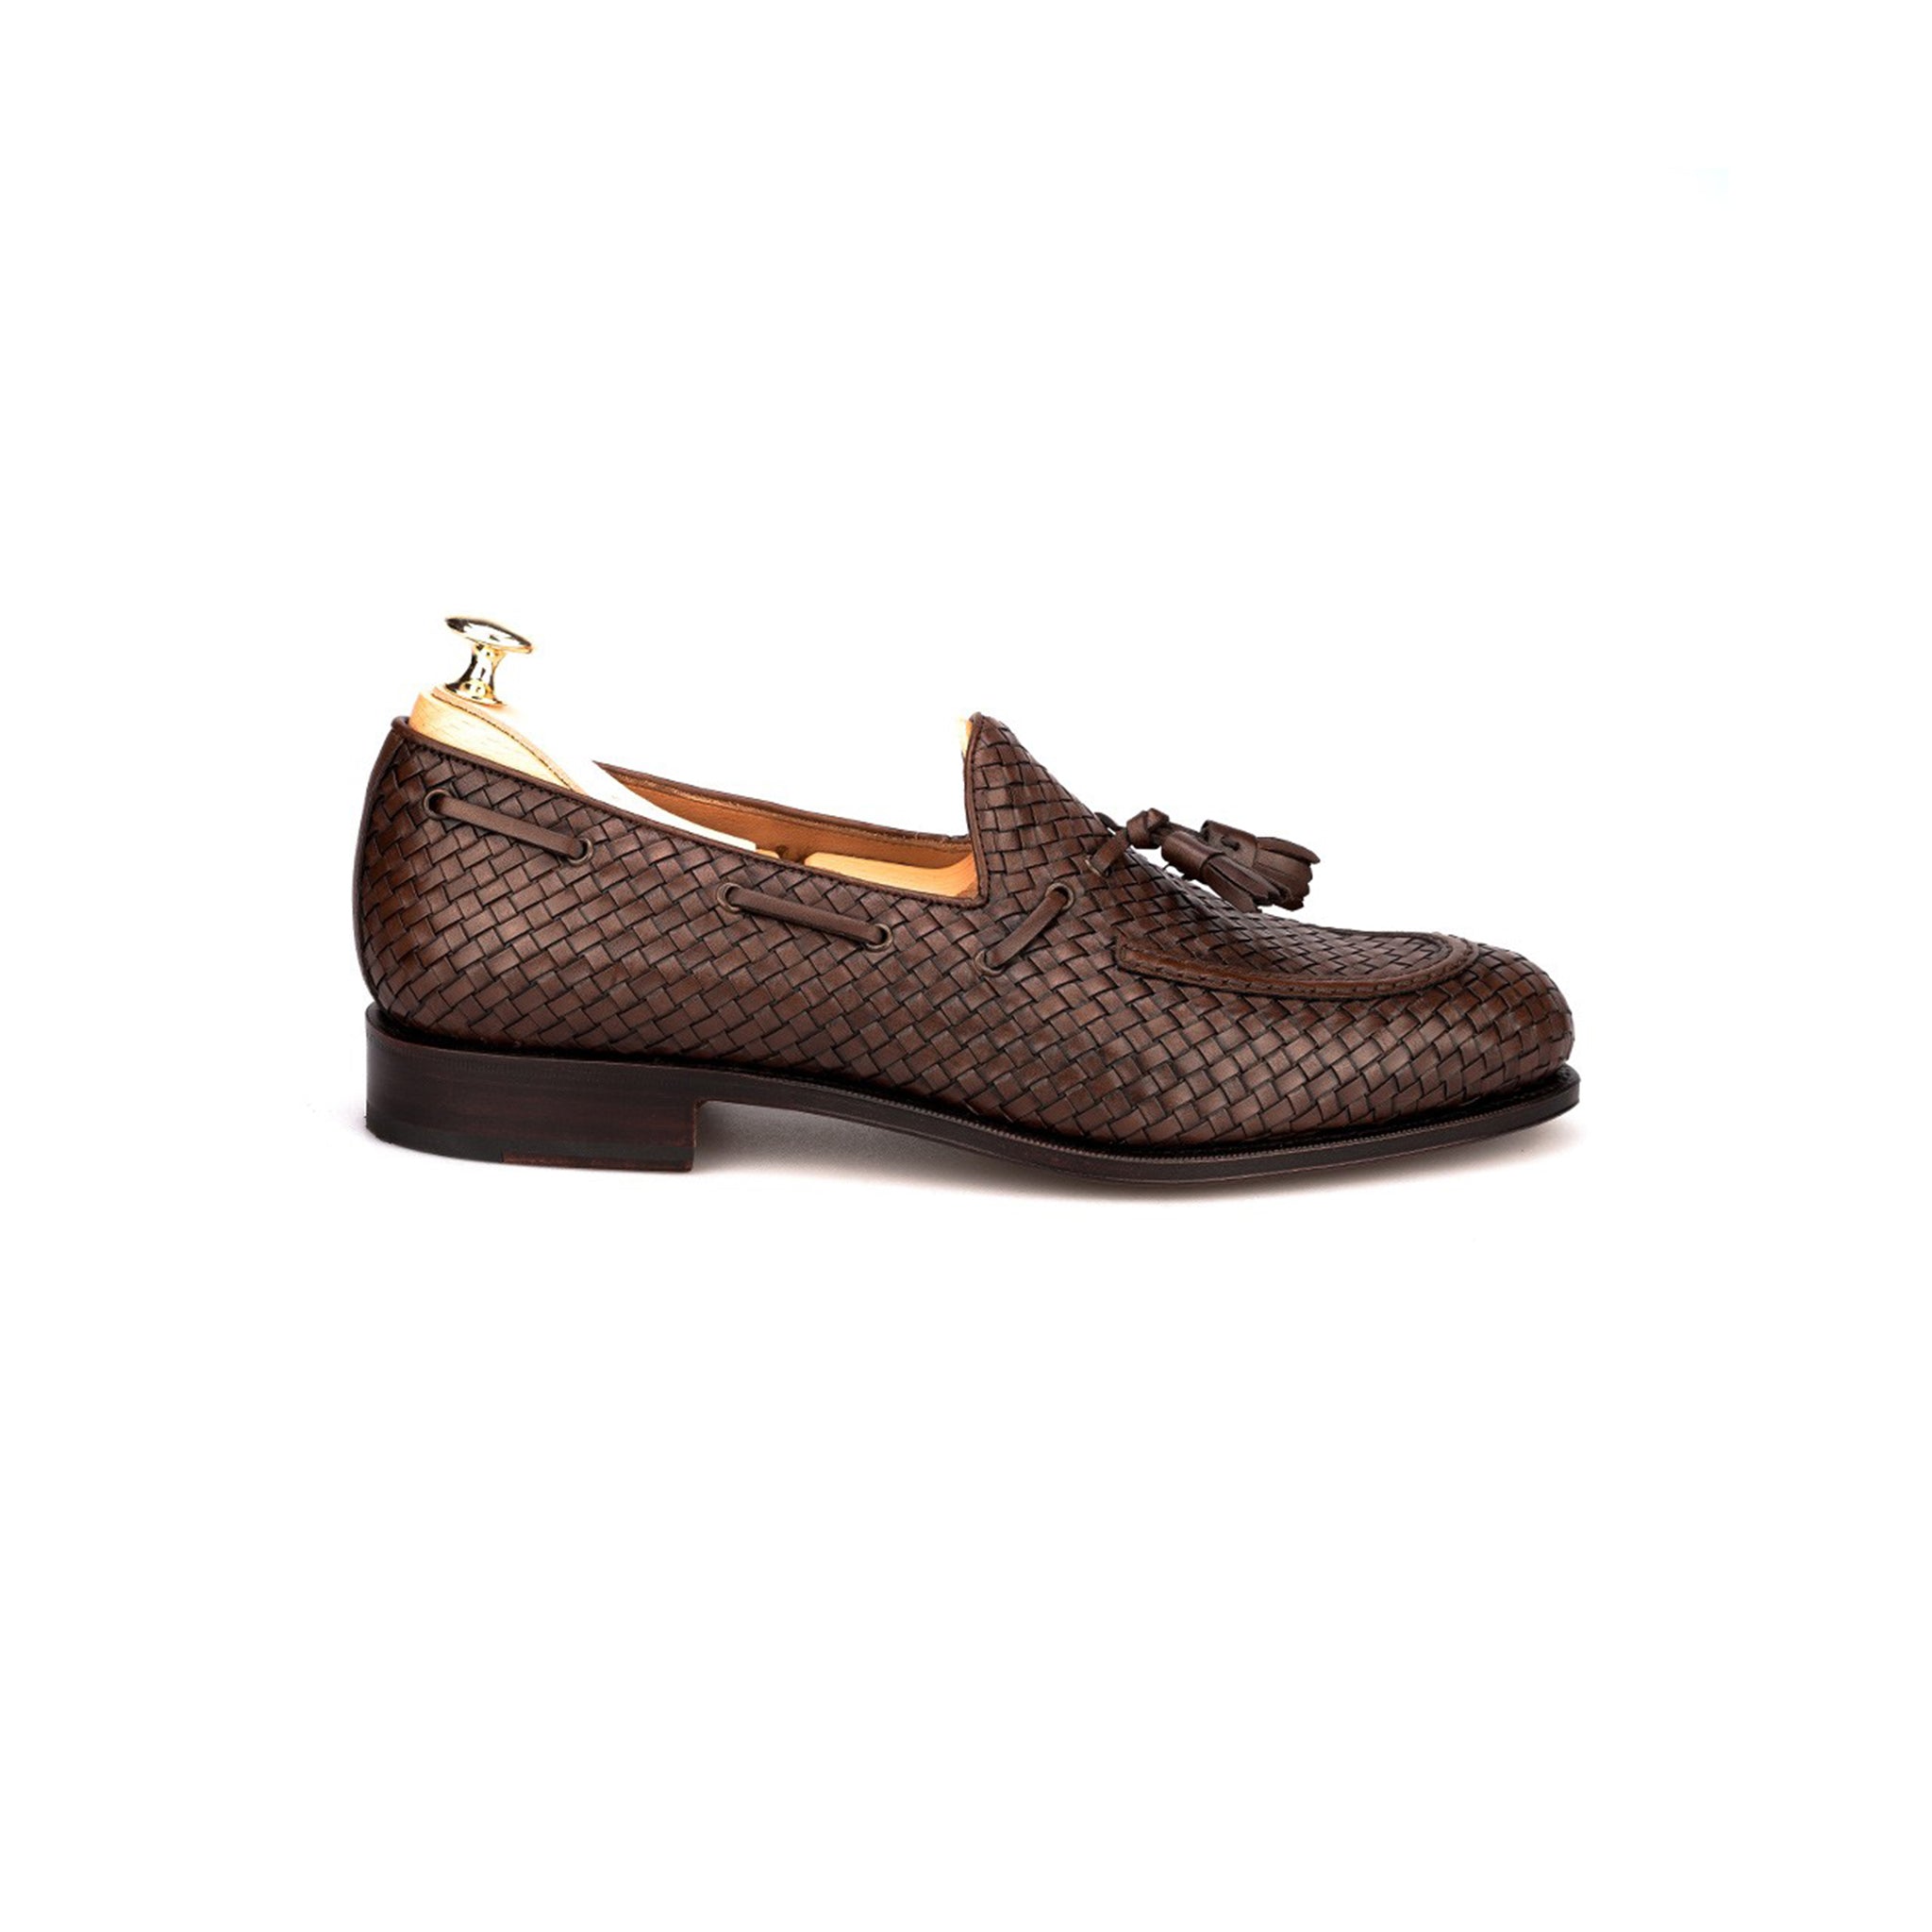 Cocoa Braided Tassel Leather Loafer